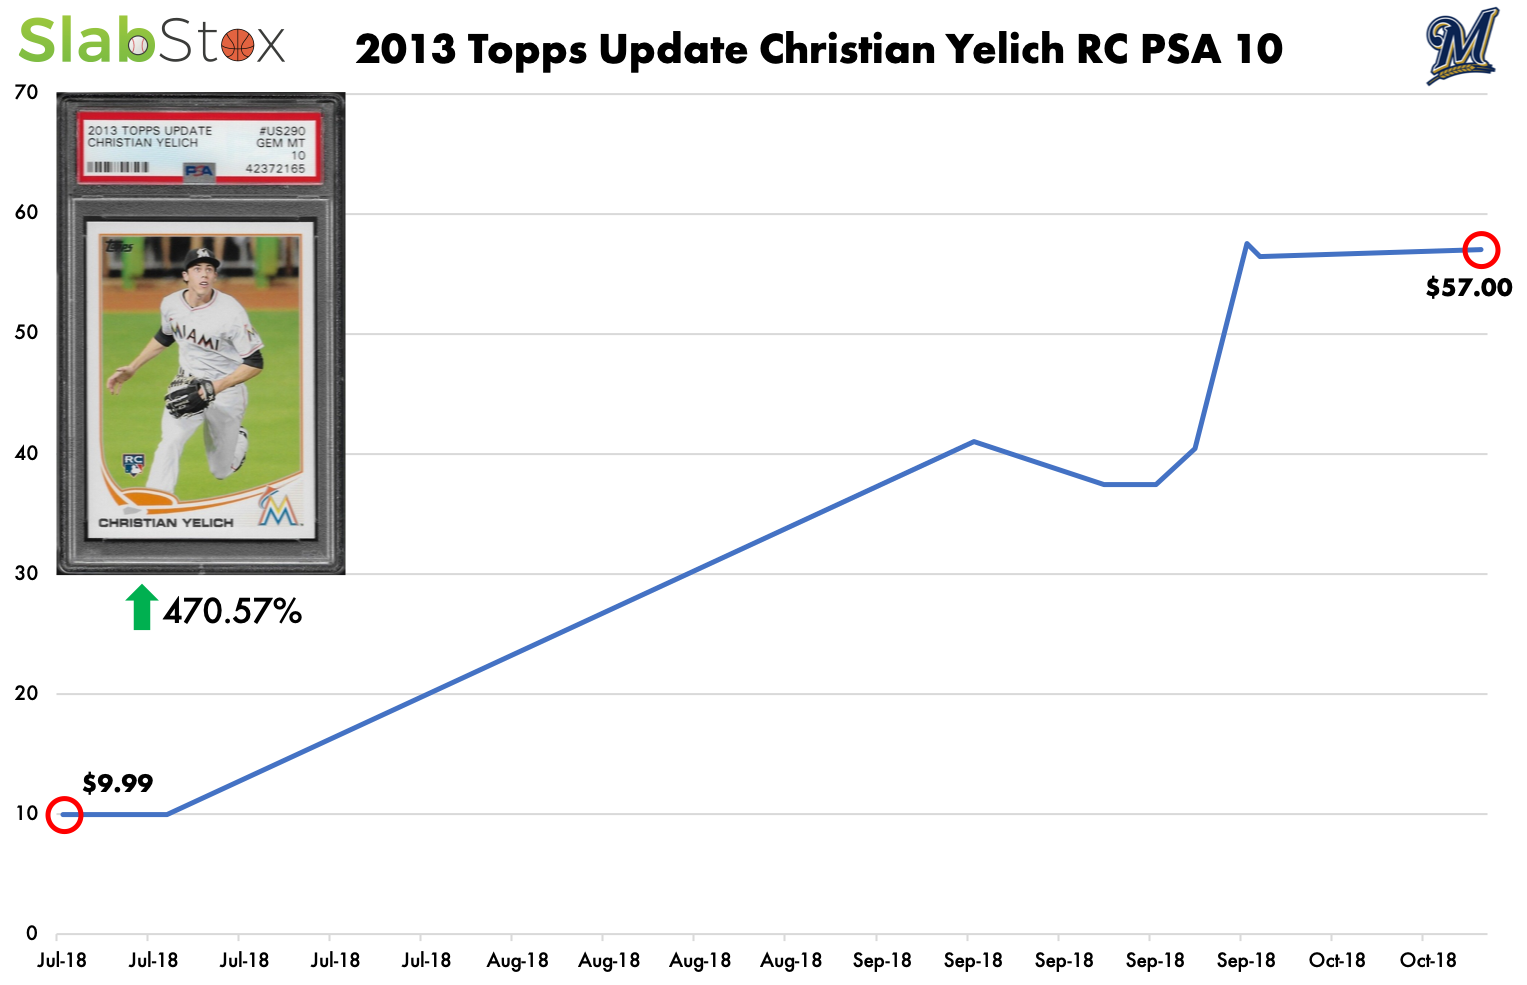 SlabStox graph of 2013 Topps Update Christian Yelich RC PSA 10 sports trading card